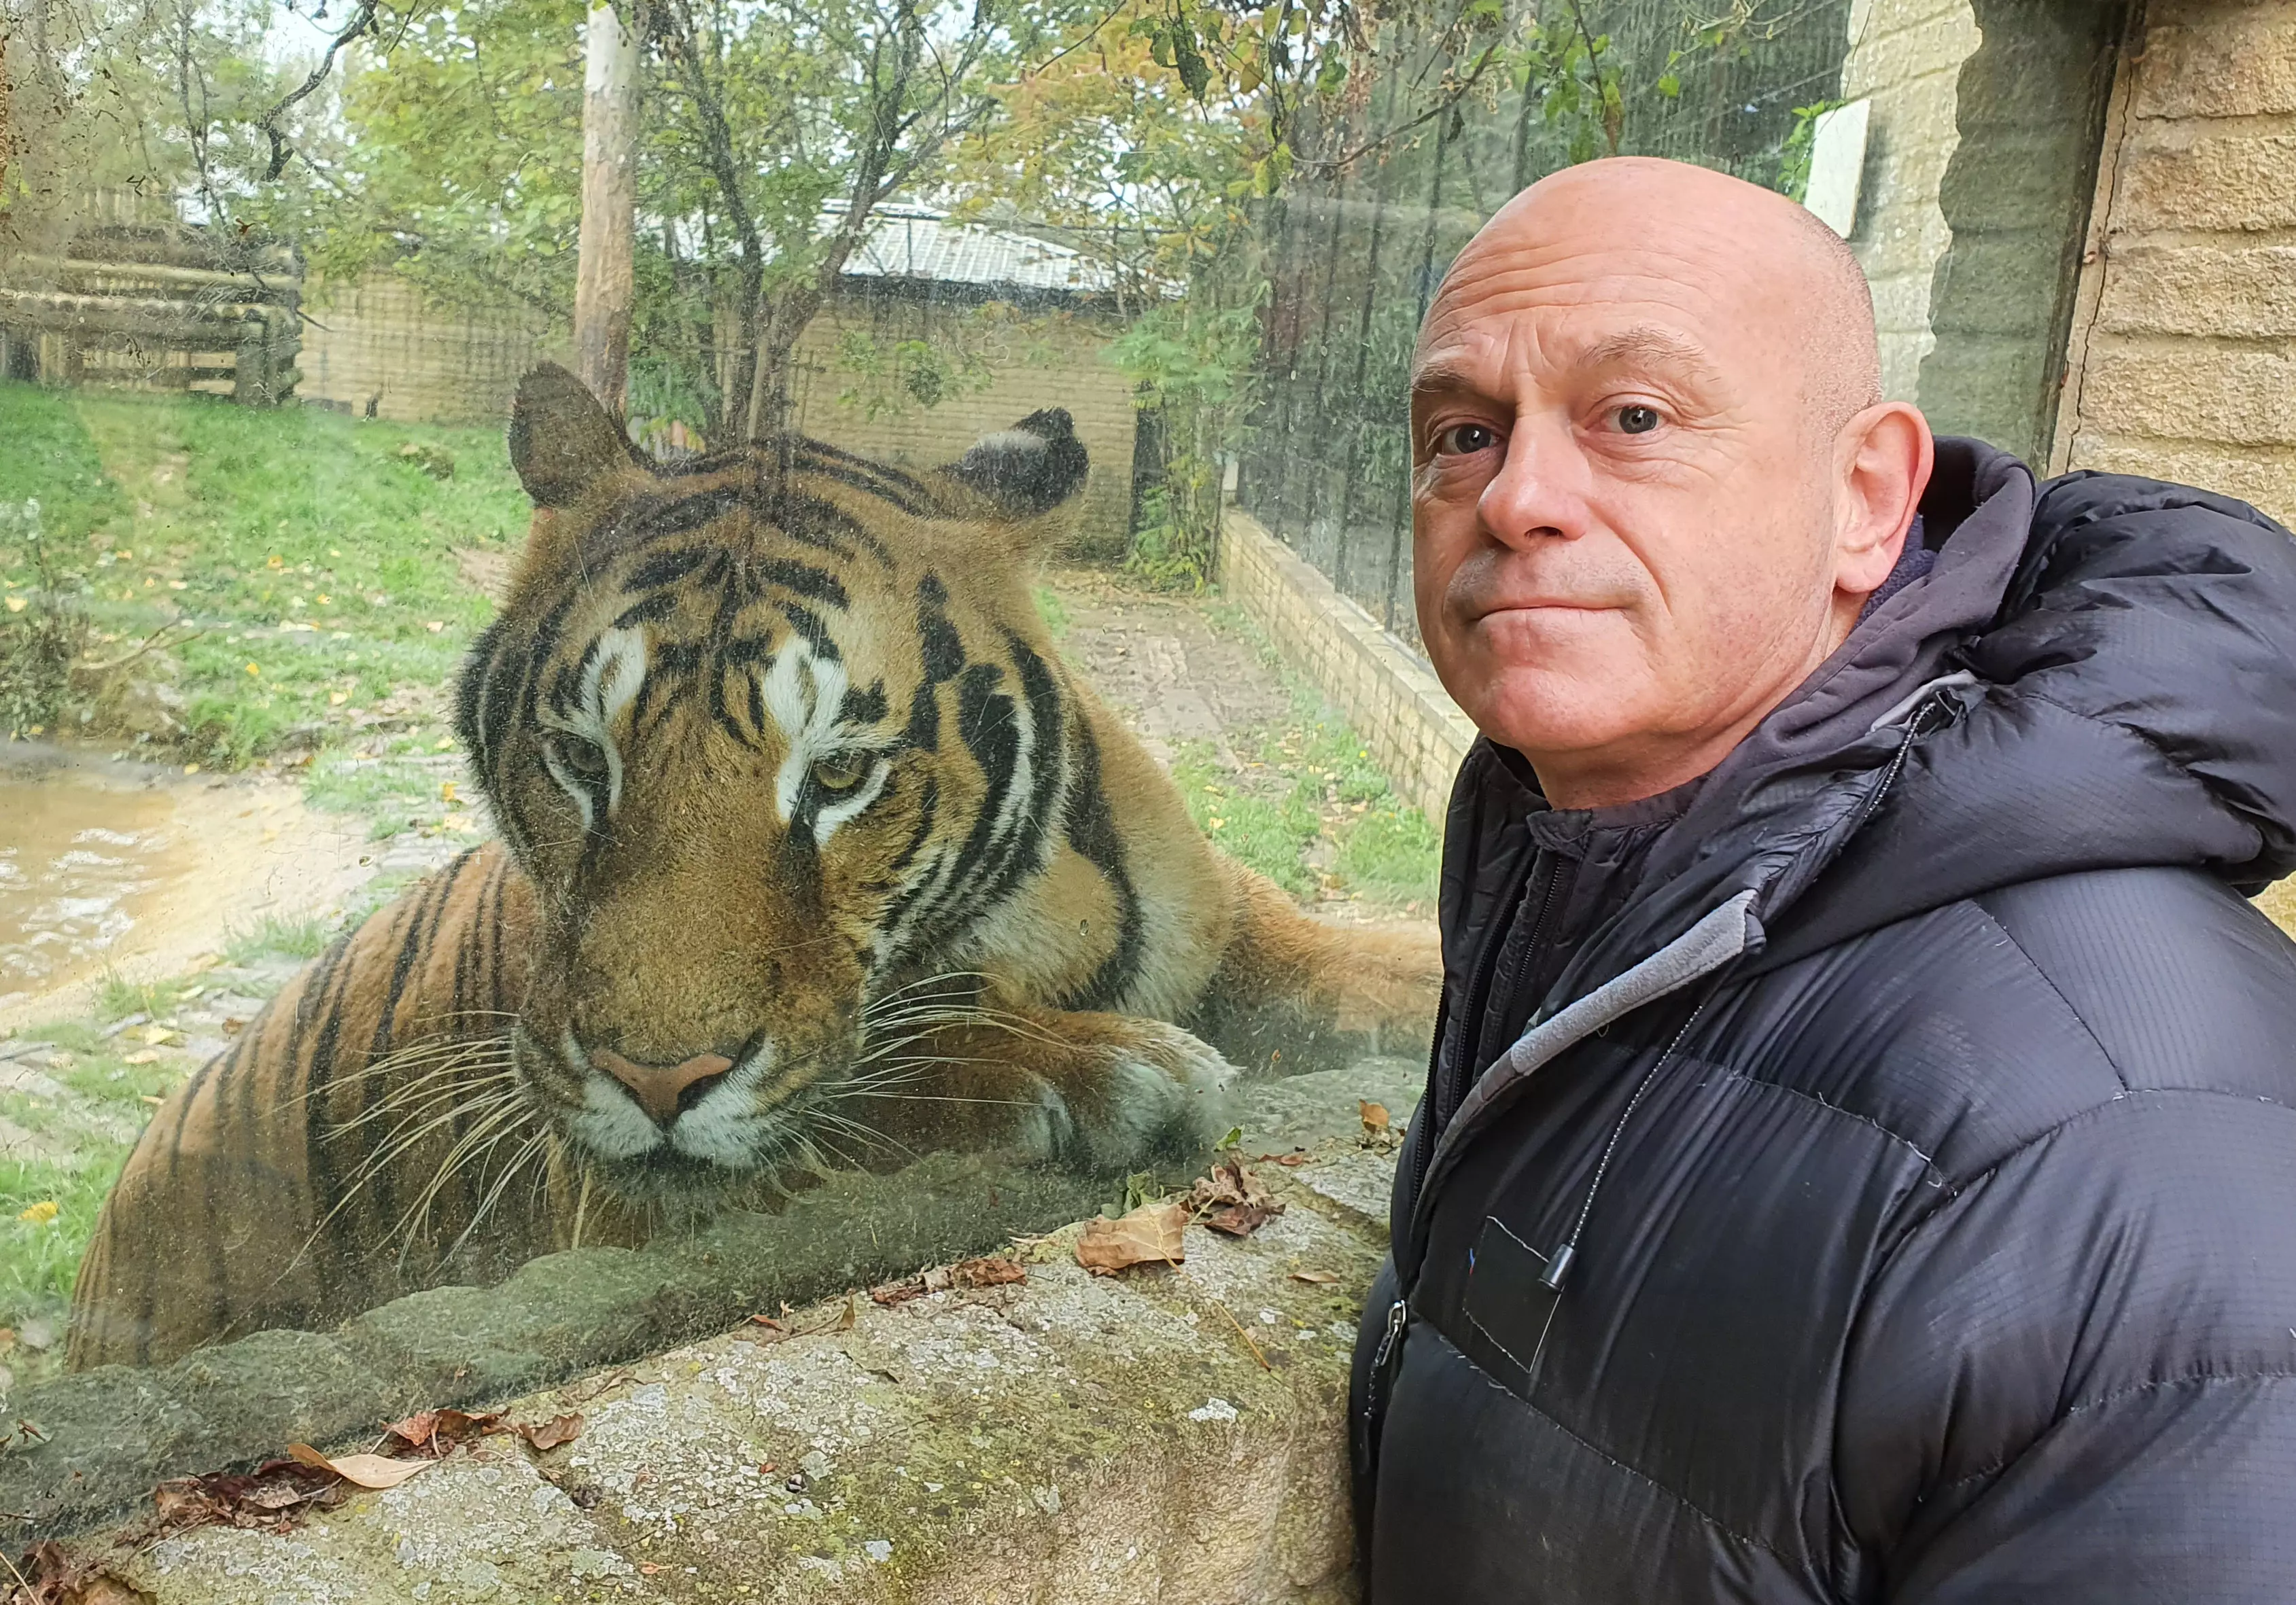 Ross Kemp will be meeting the UK's answers to Joe Exotic (